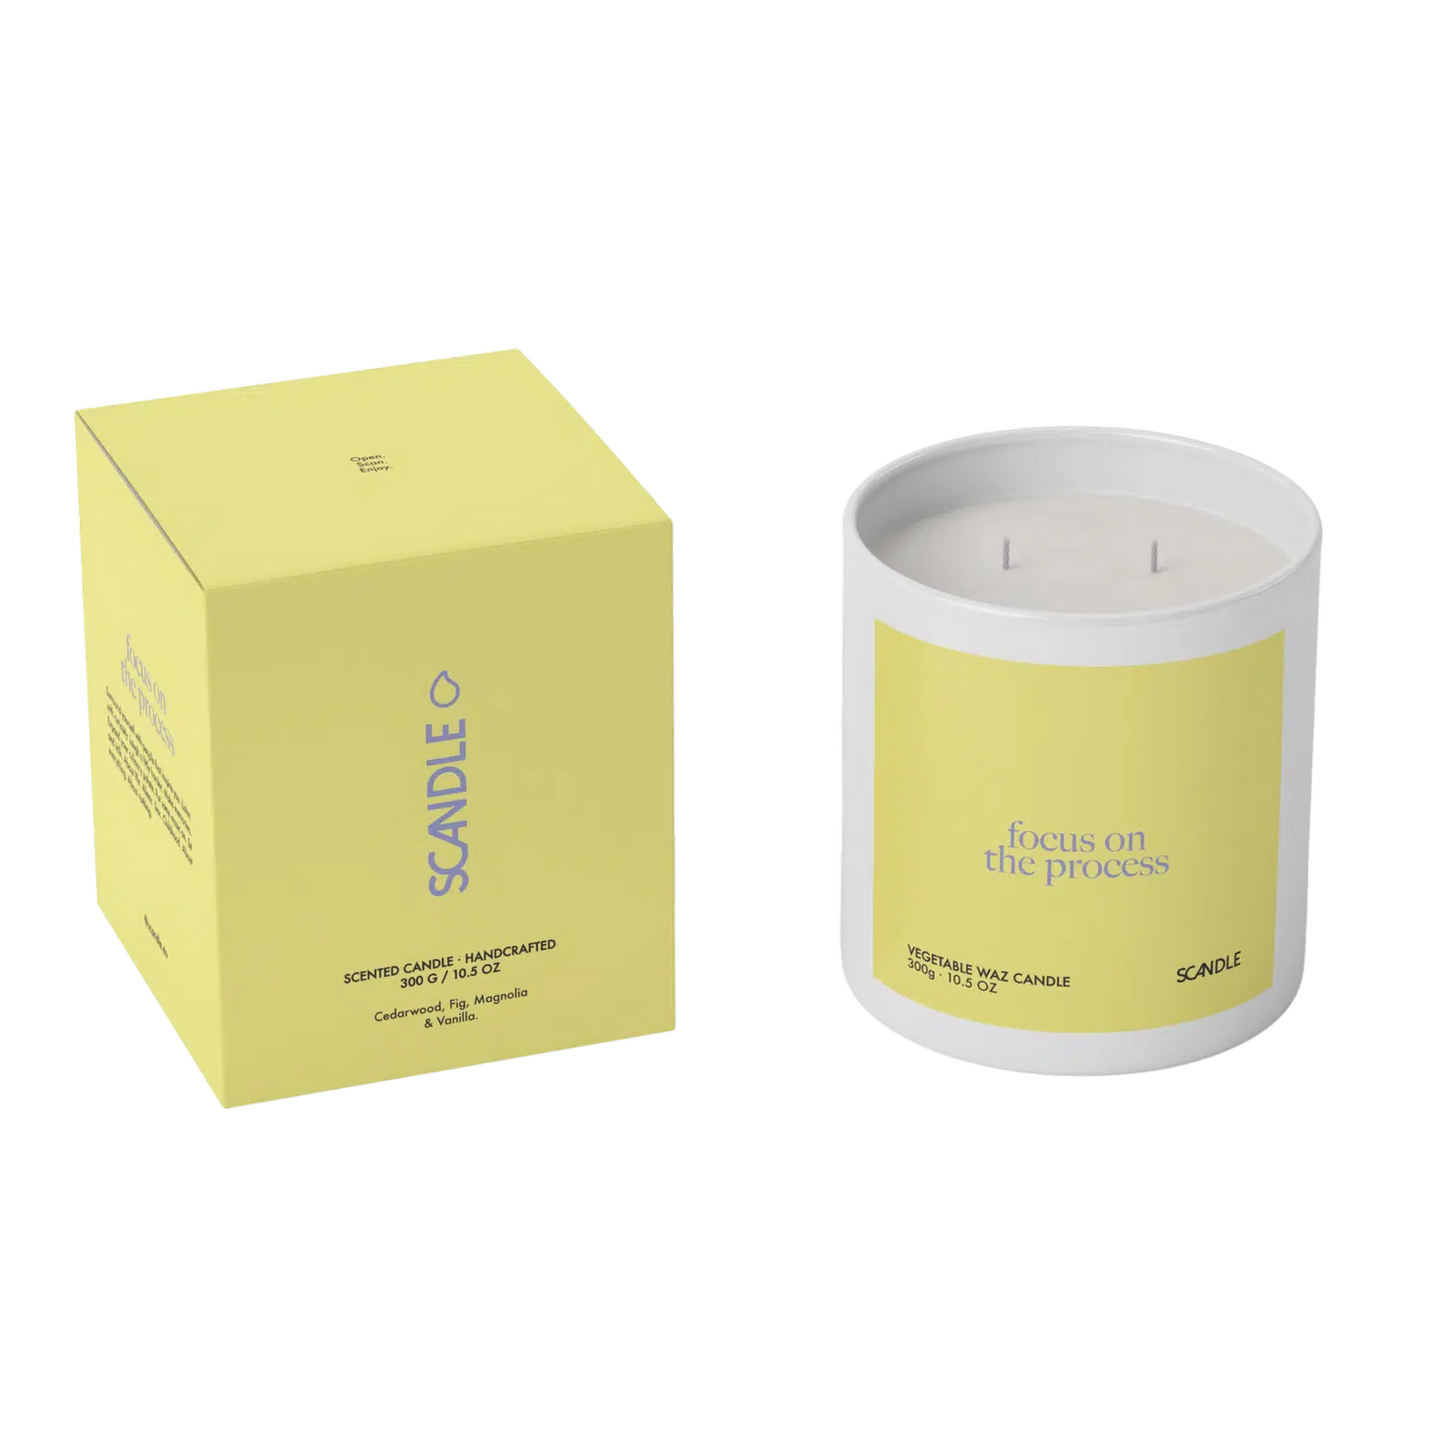 Scandle 'Focus On The Process' Scented Candle 300gr